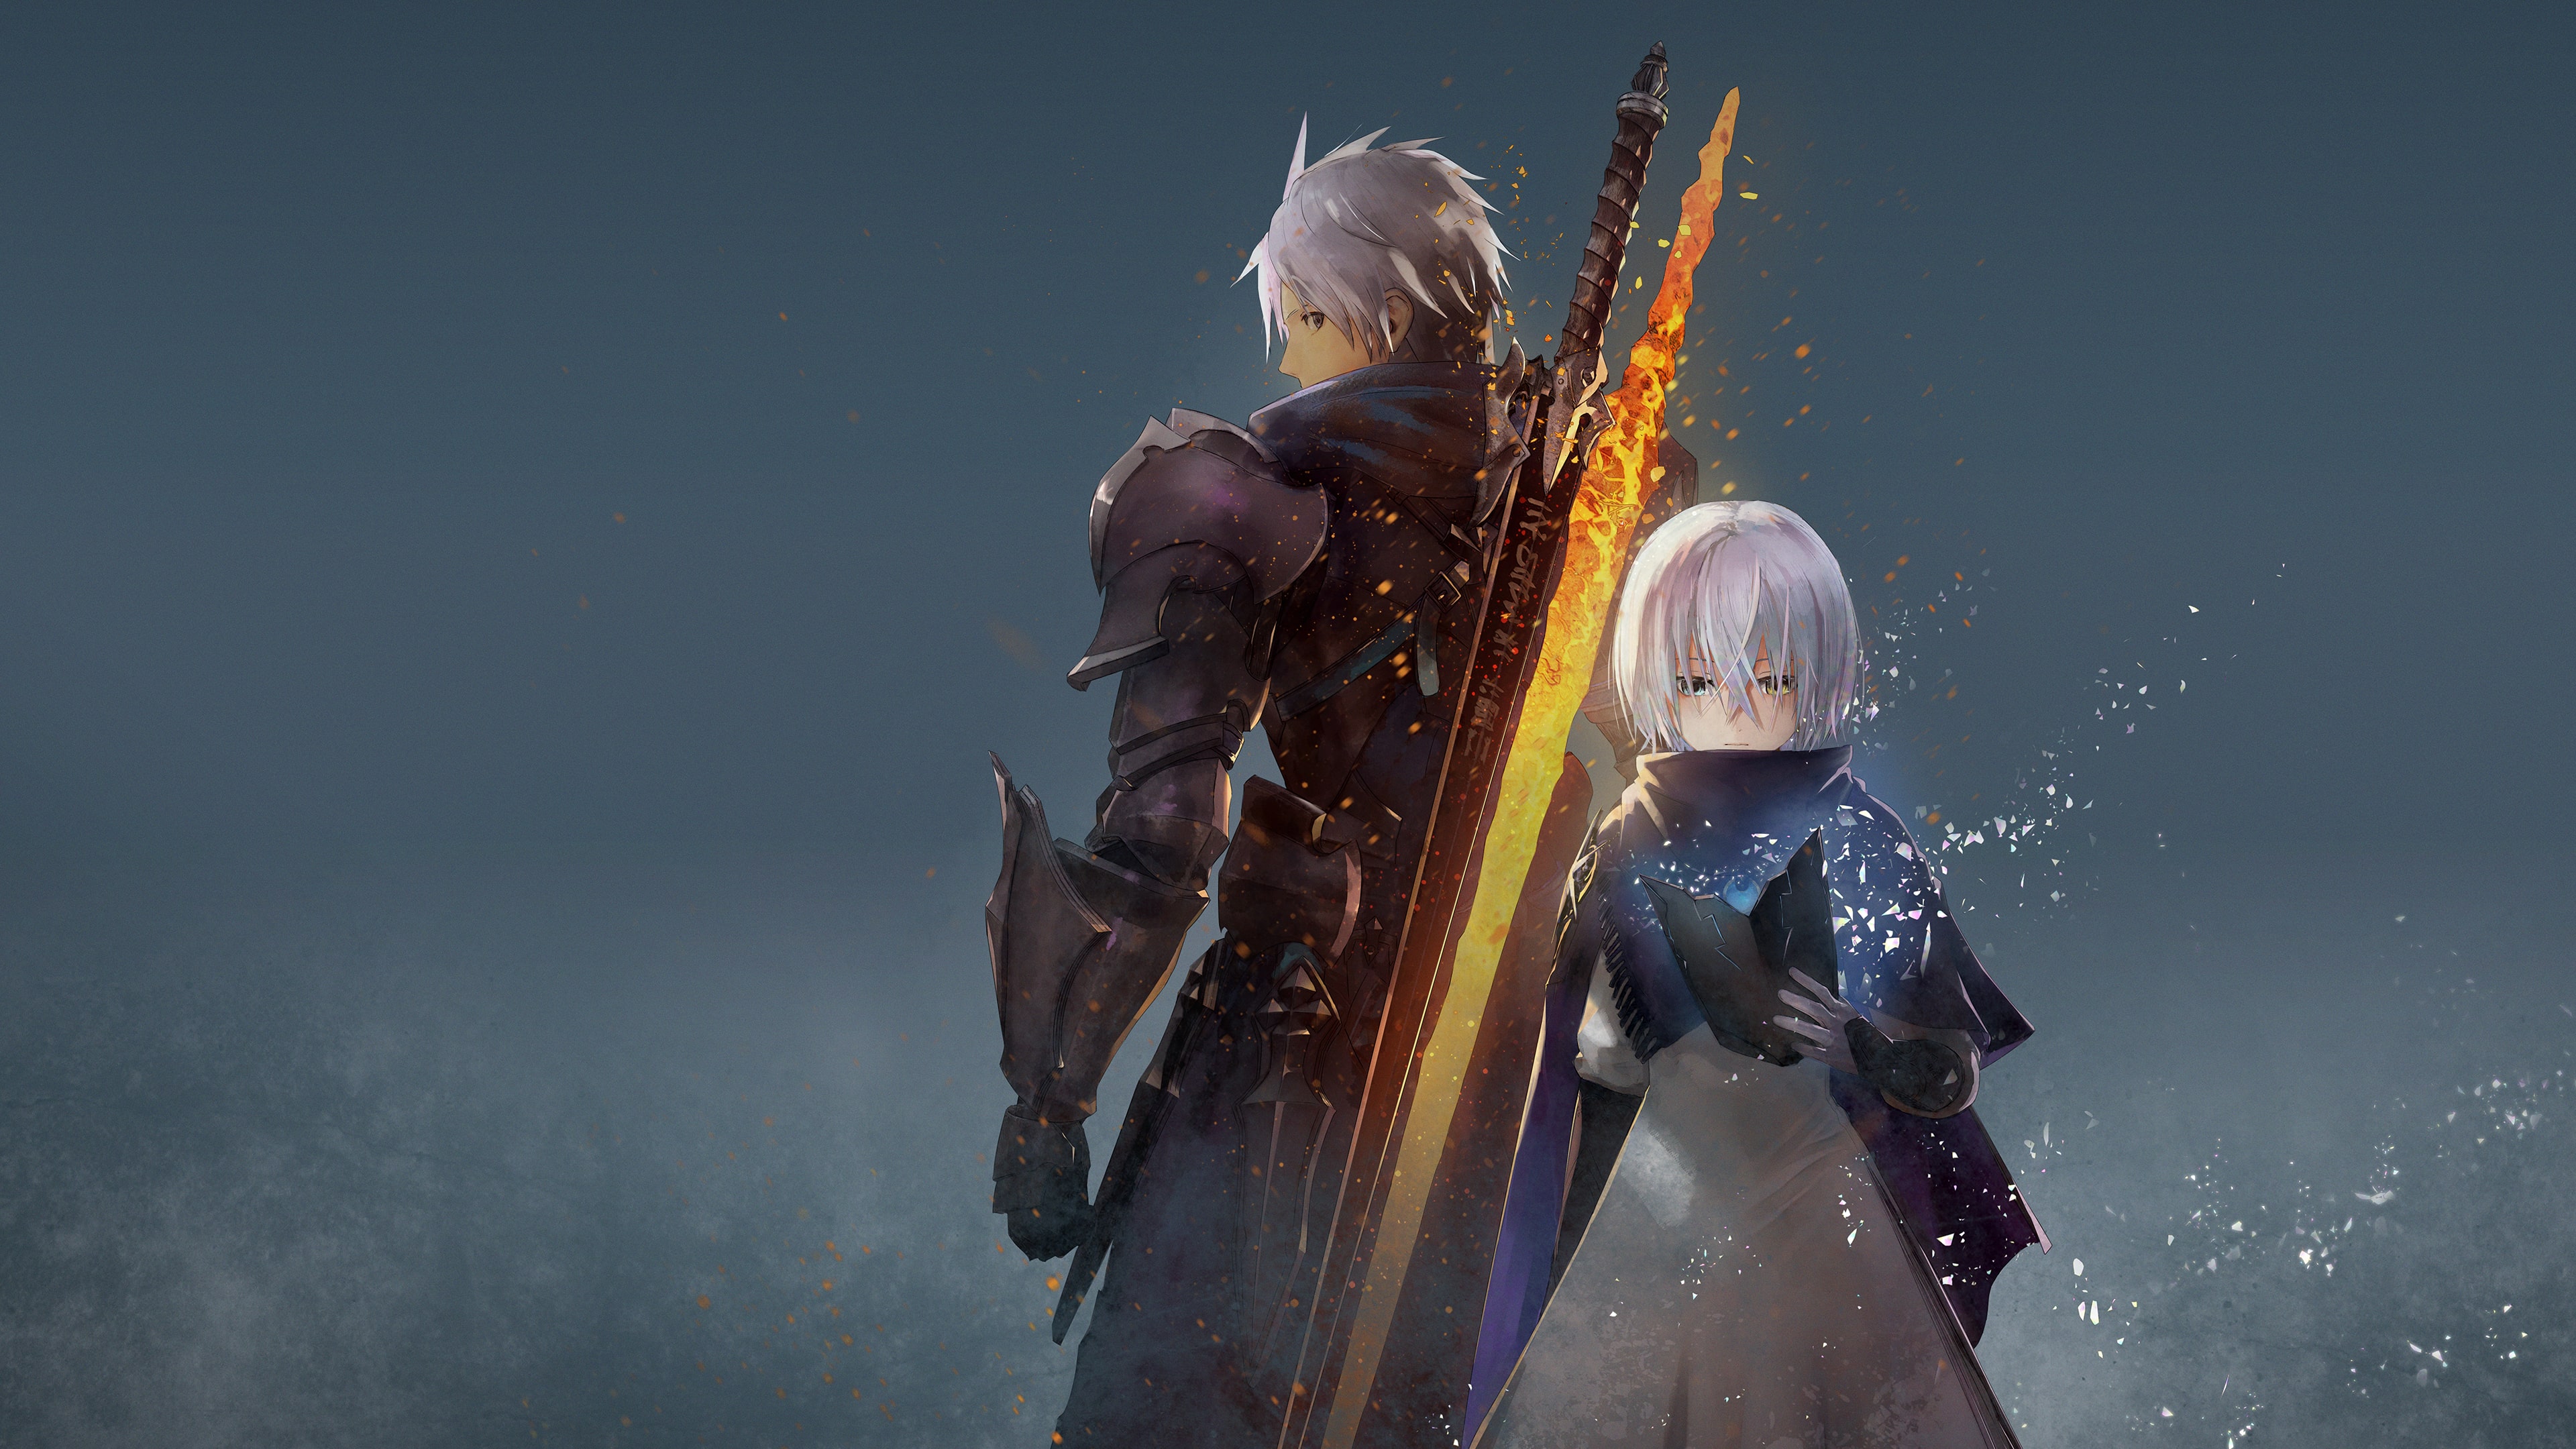 Tales of ARISE - Beyond the Dawn エキスパンション PS4® & PS5®